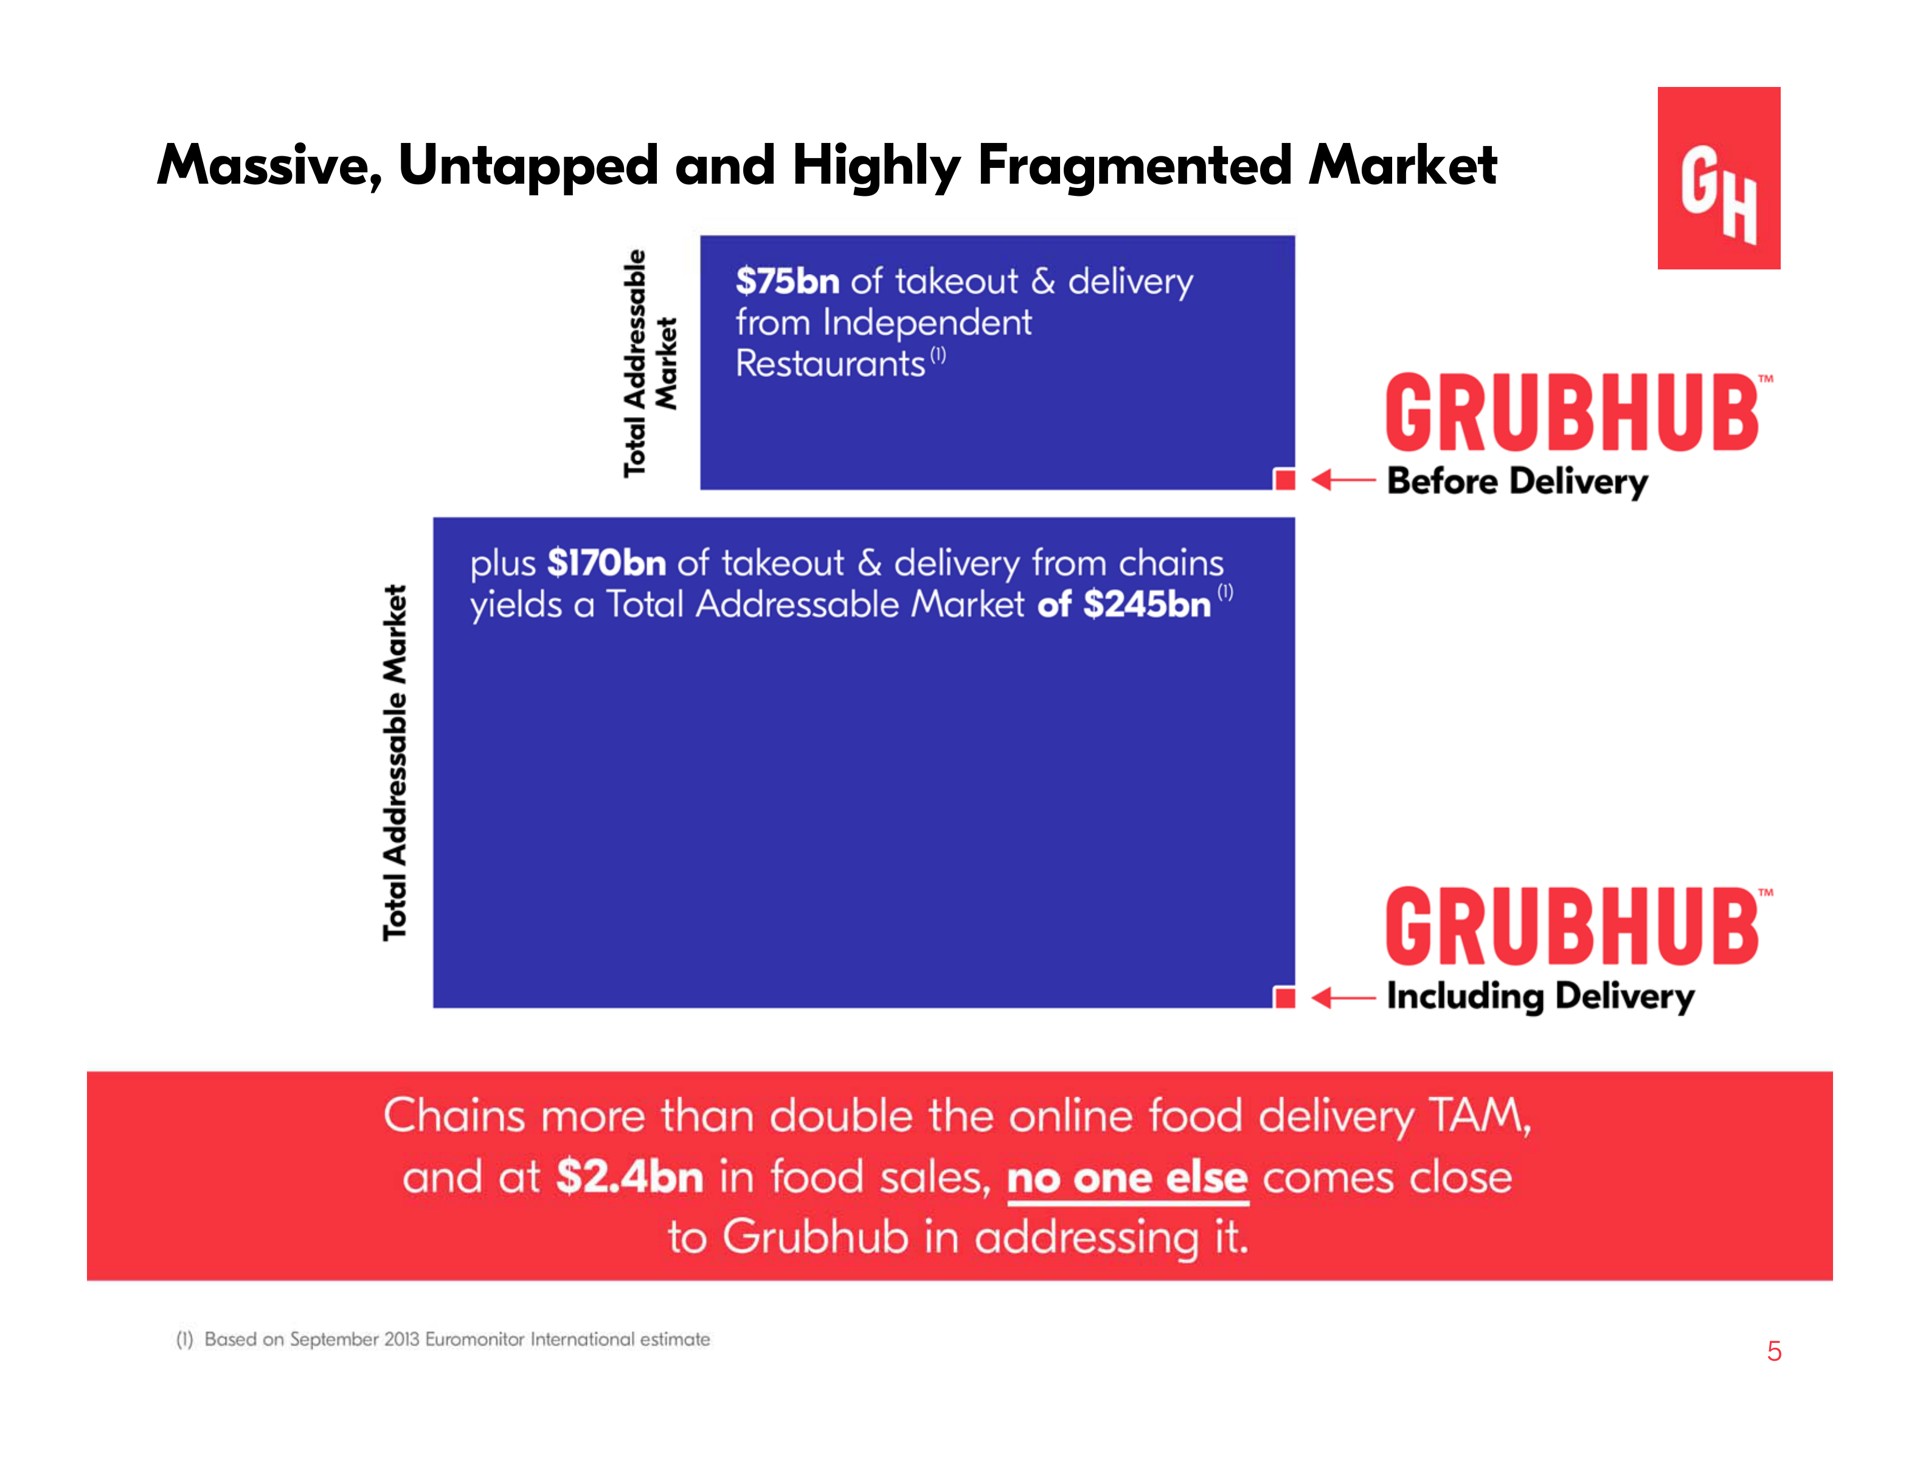 massive untapped and highly fragmented market chains more than double the food delivery tam to in addressing it | Grubhub